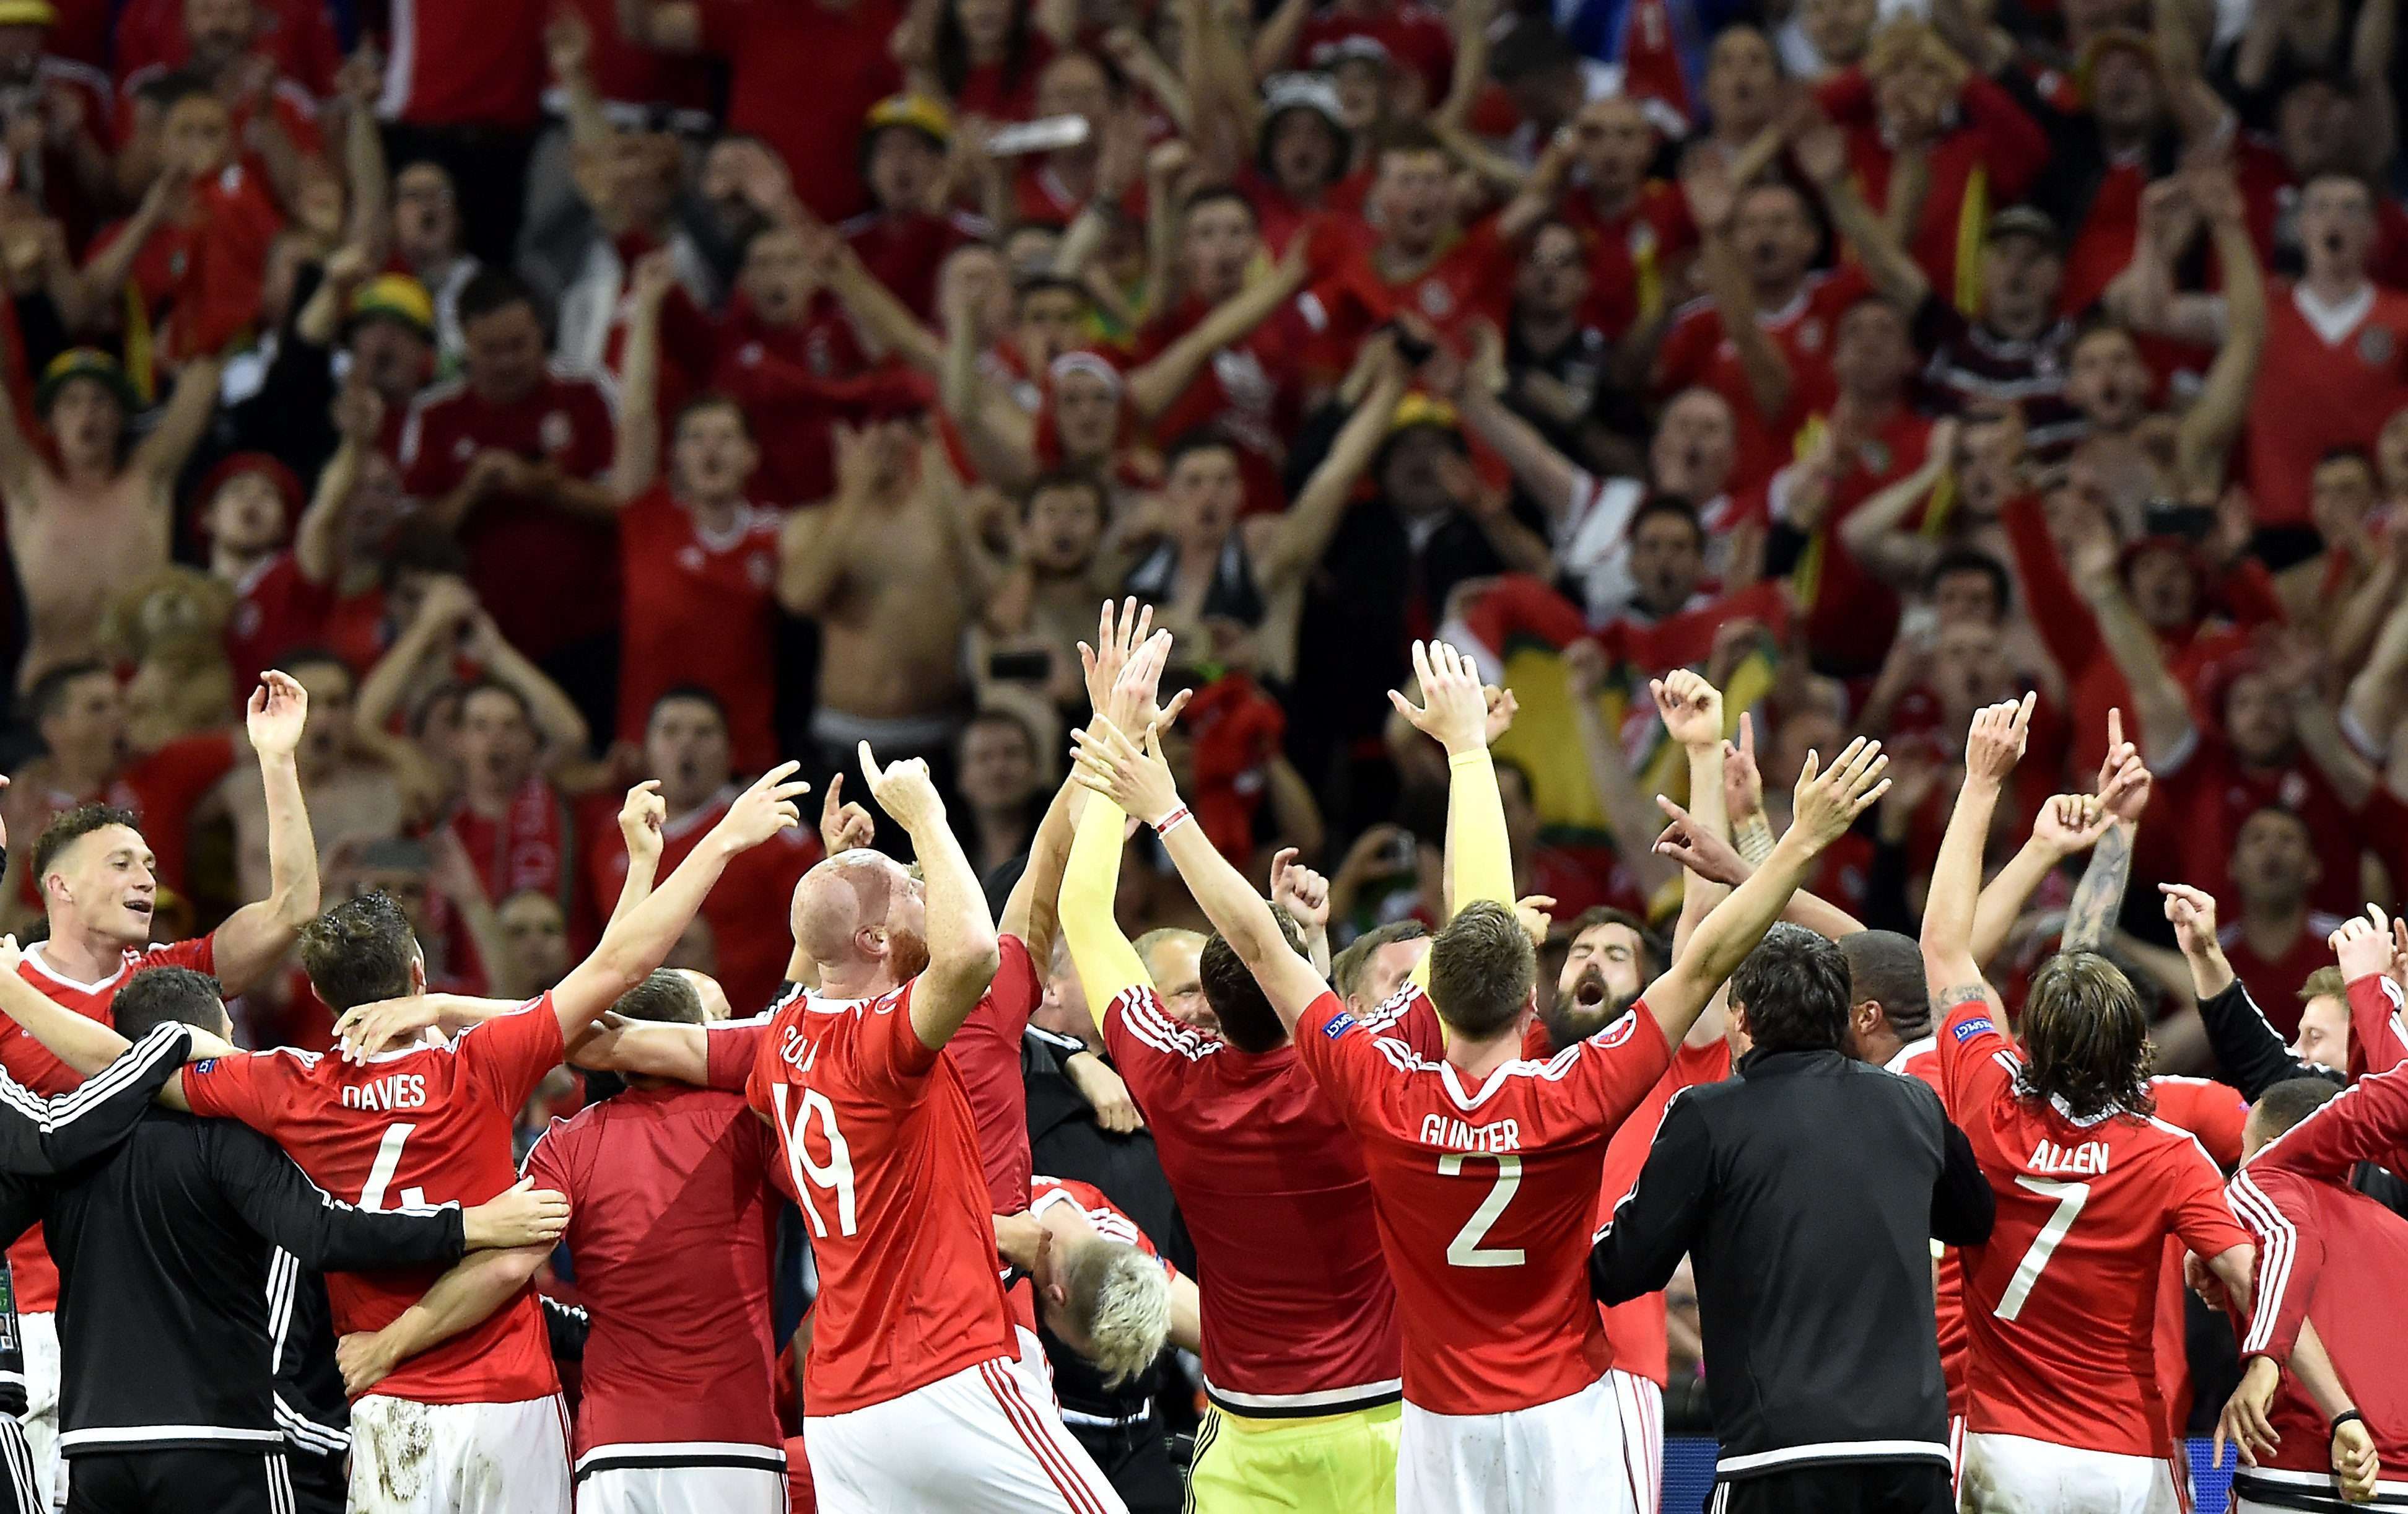 Wales celebrate with fans after the 3-1 win over Belgium. Photo: EPA